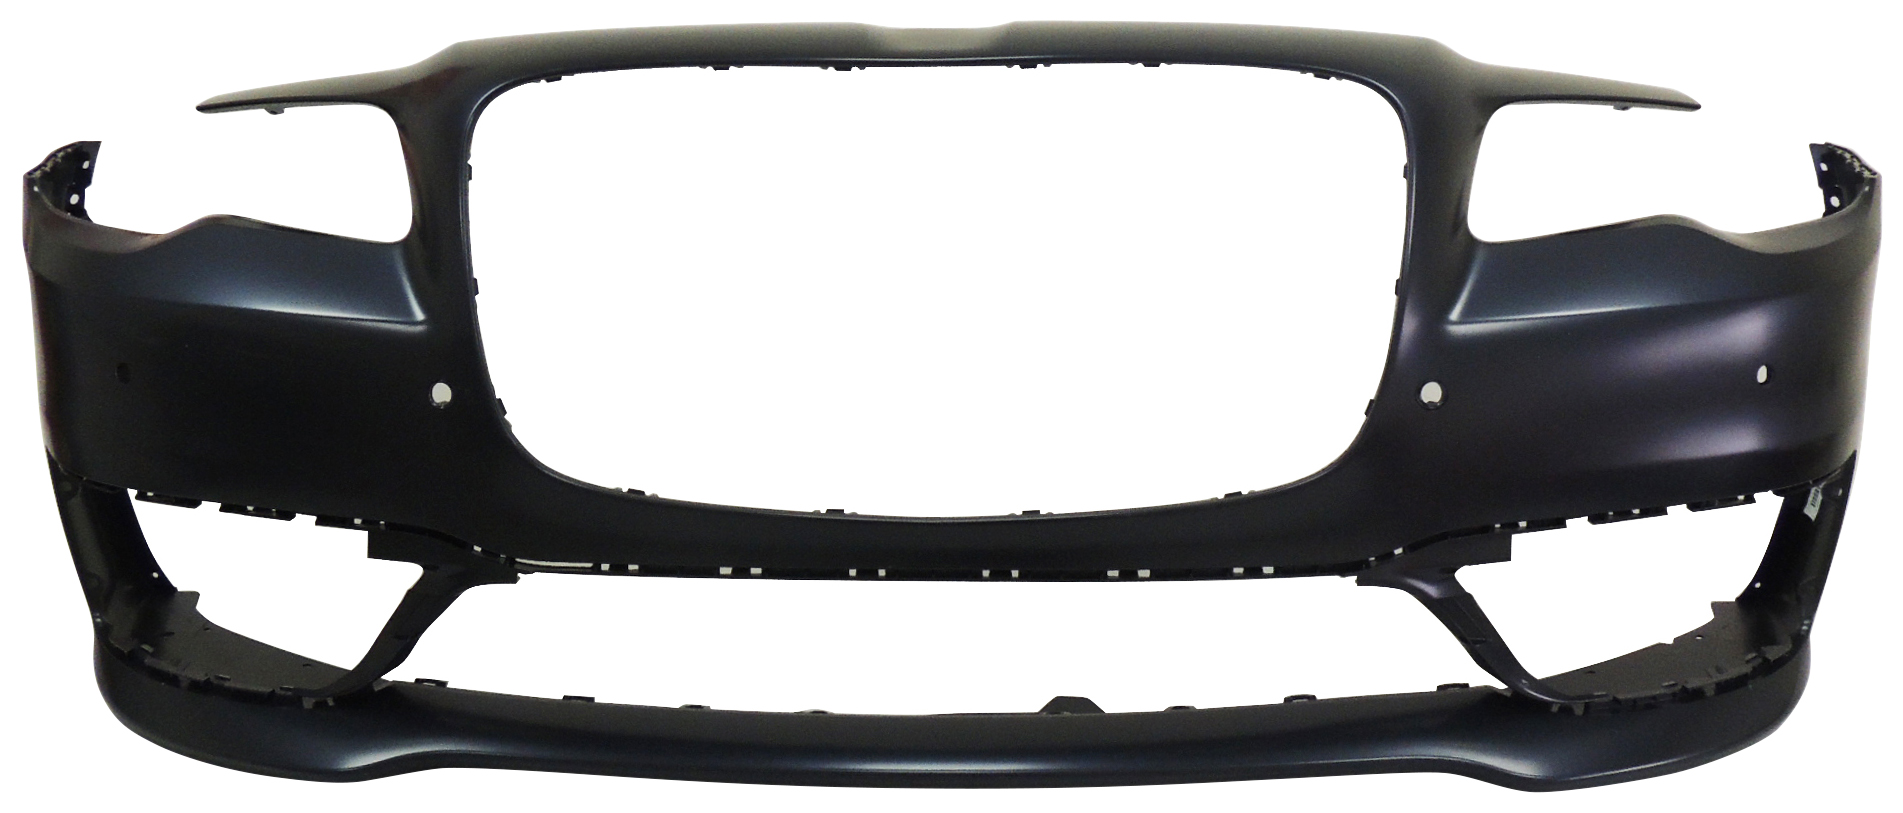 Aftermarket BUMPER COVERS for CHRYSLER - 300, 300,17-22,Front bumper cover